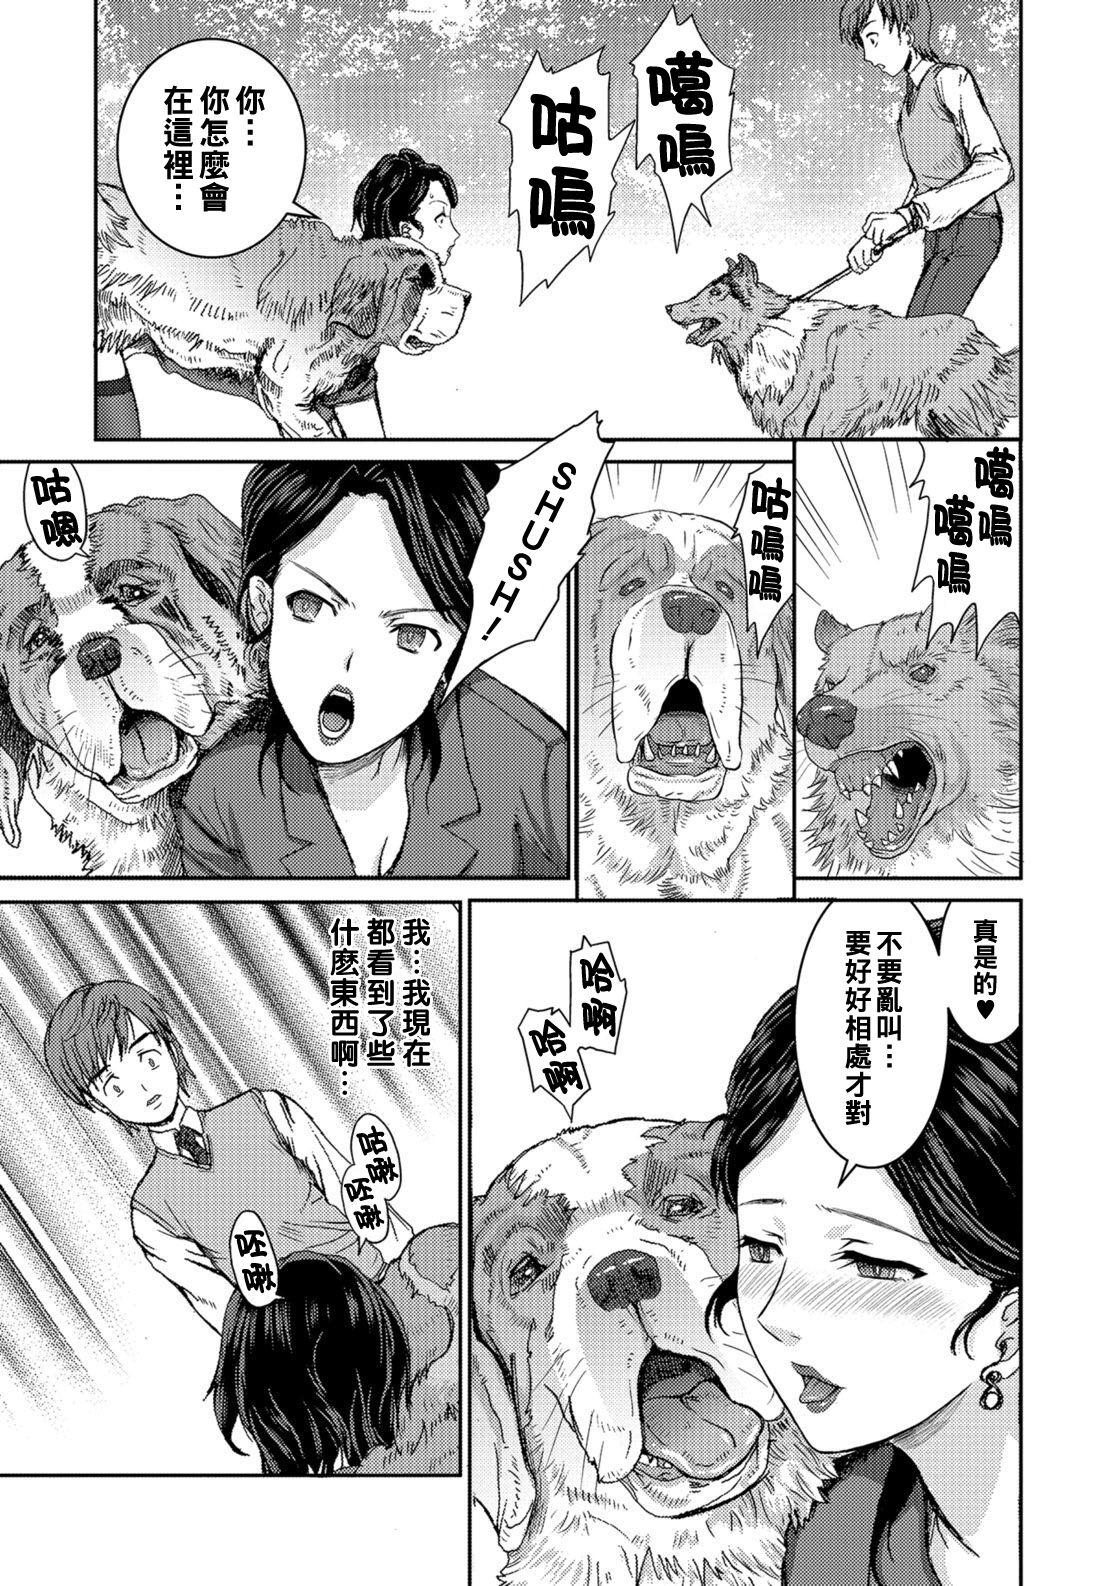 Blowjob Contest [竹壱おこめ] 仄暗き森の隷属 -The SUIT and DOG-（Chinese） Perfect Body - Page 9